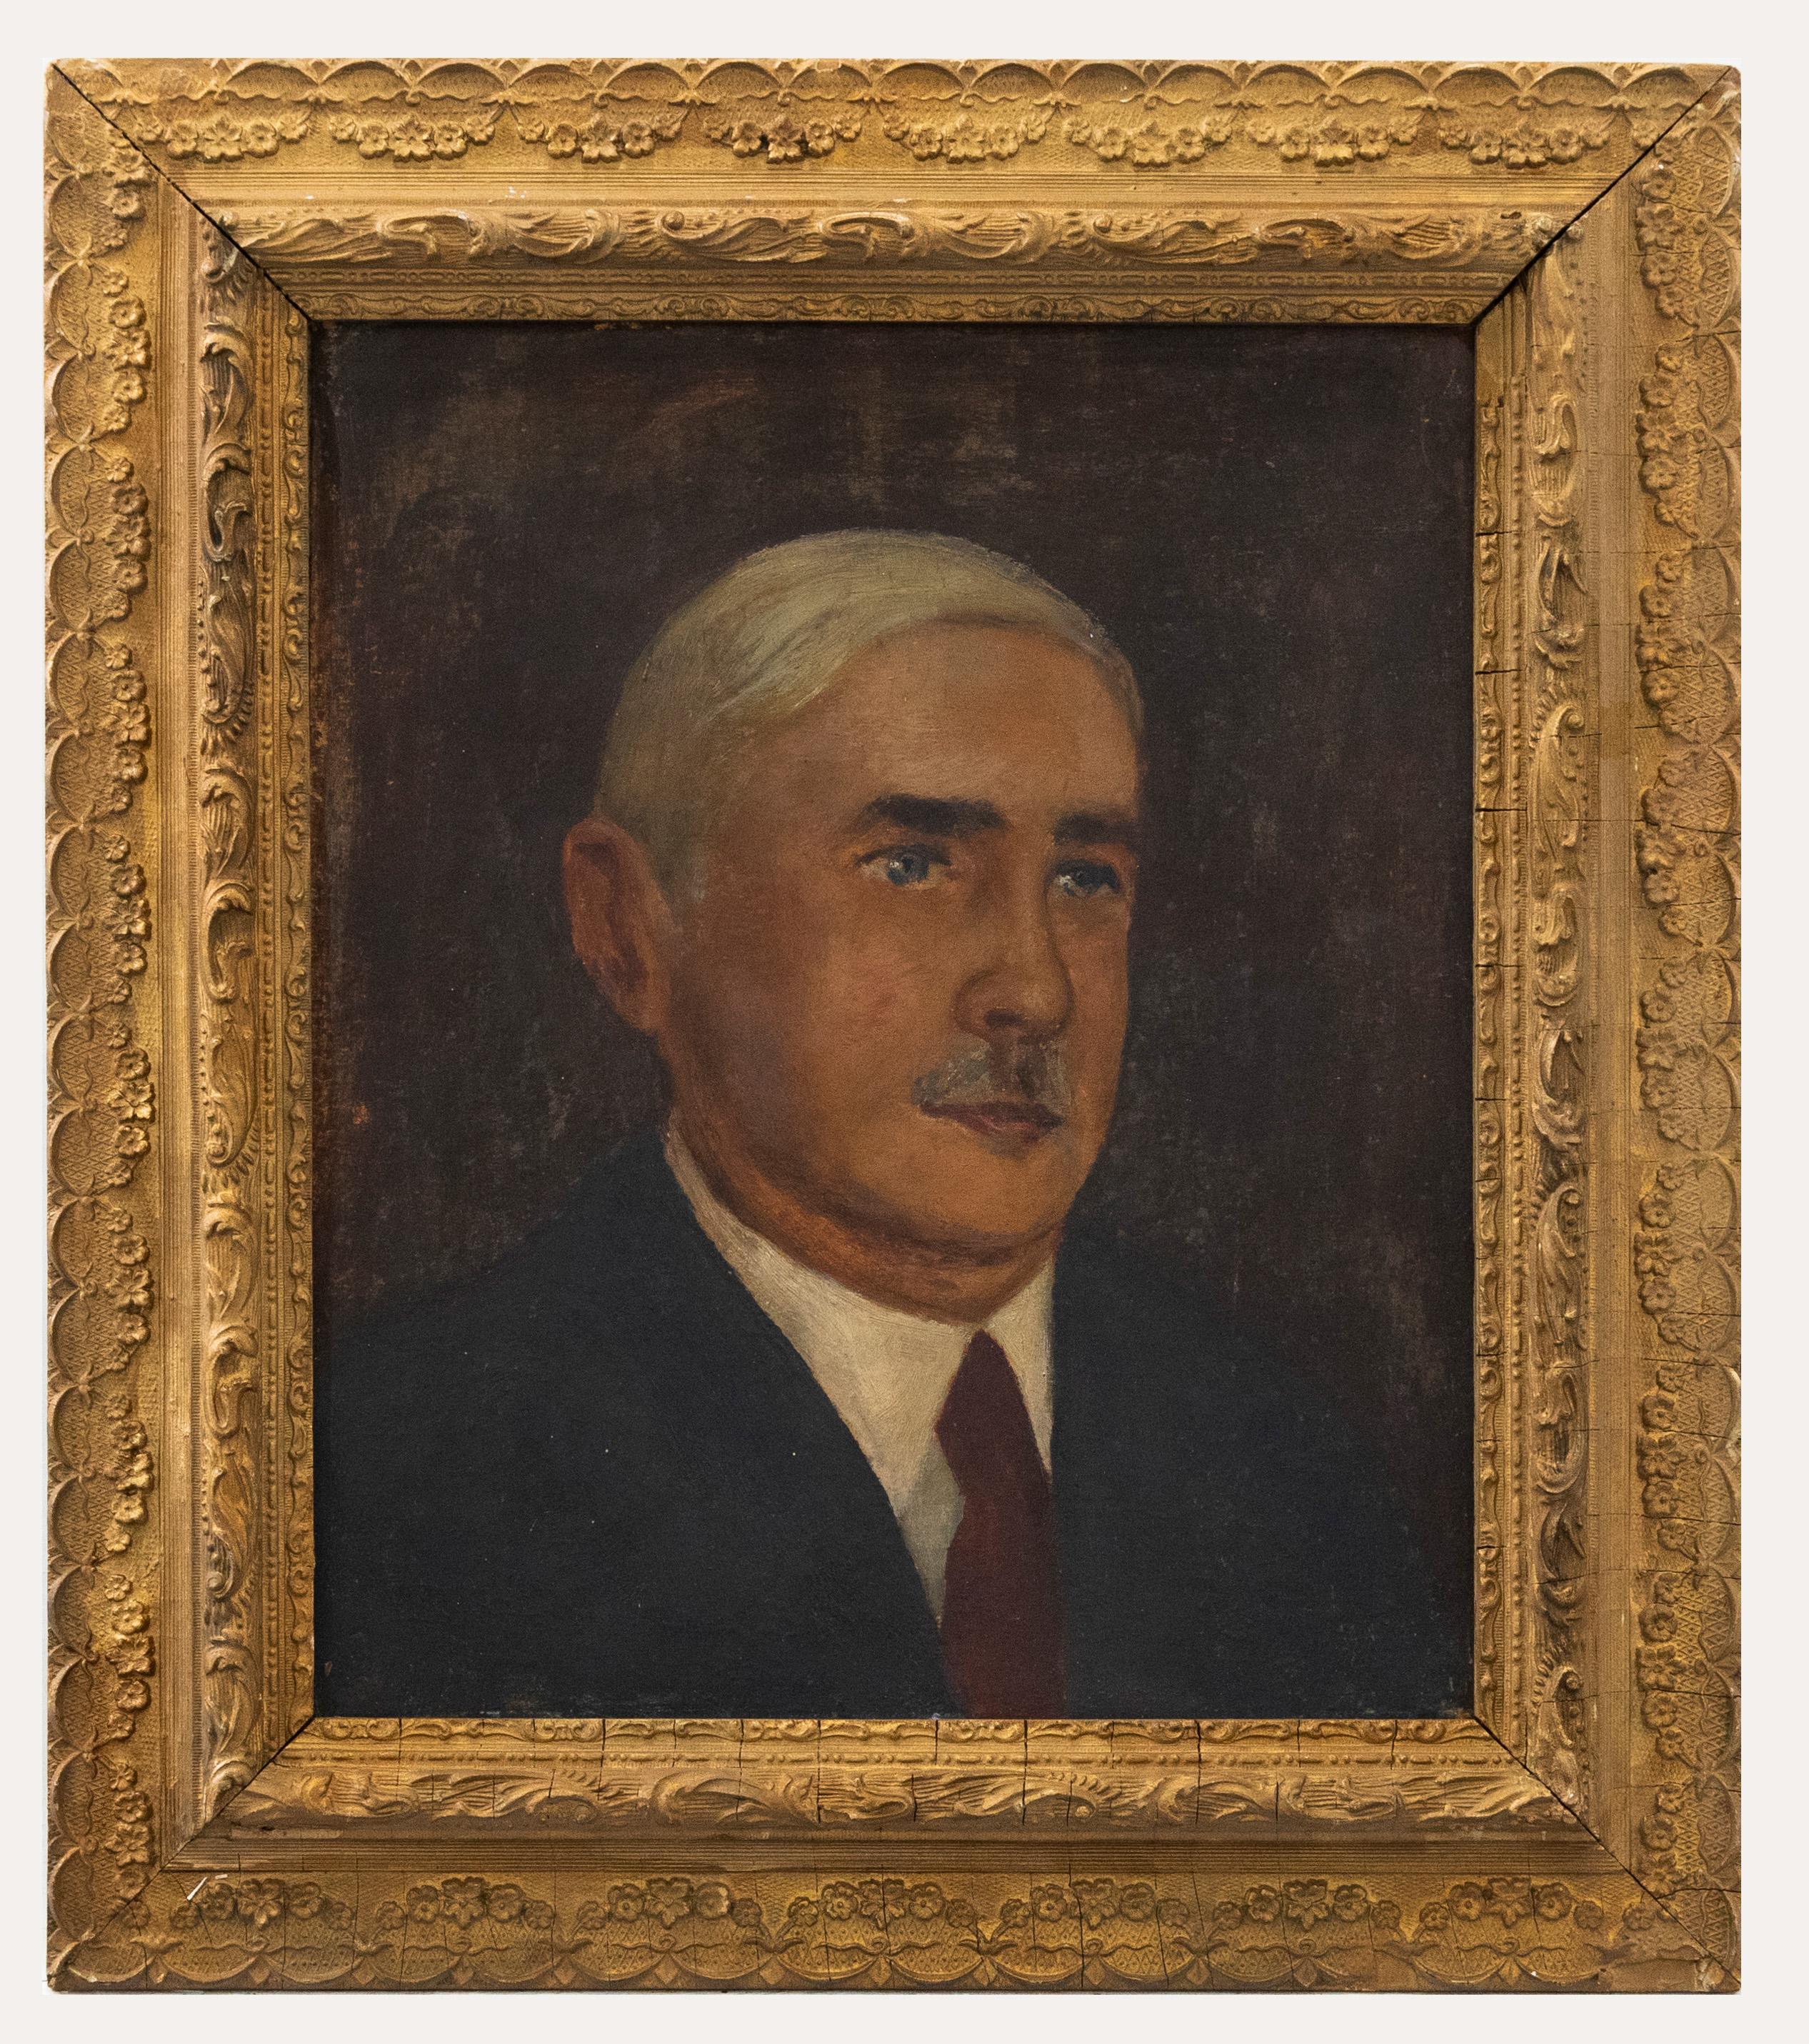 A delightful portrait of a middle-aged businessman who is smartly dressed in a navy suit and red tie. Well presented in an ornate gilt effect frame. Unsigned. On board.
